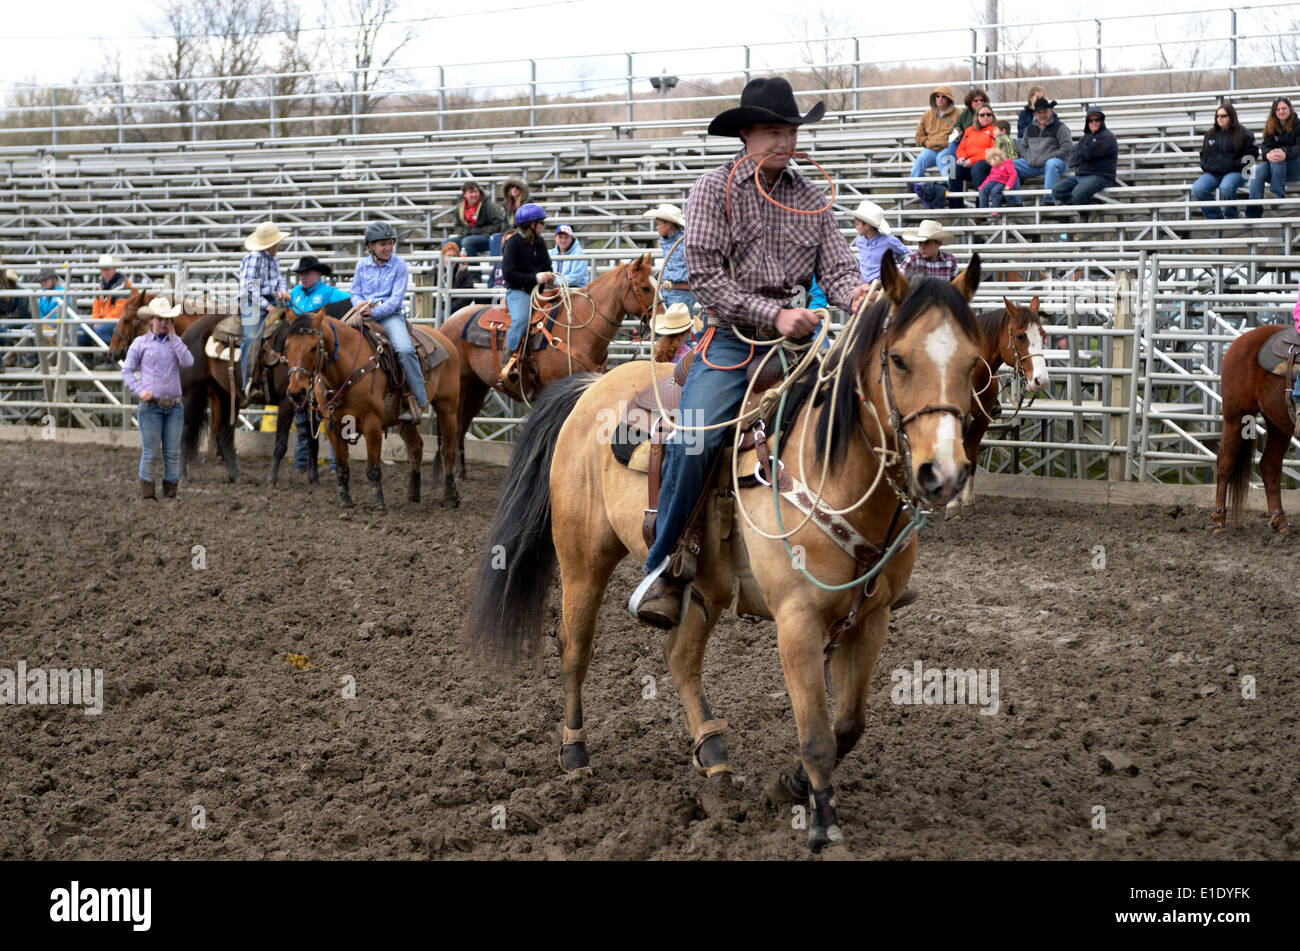 high school rodeo competitor takes his position in calf roping. Stock Photo